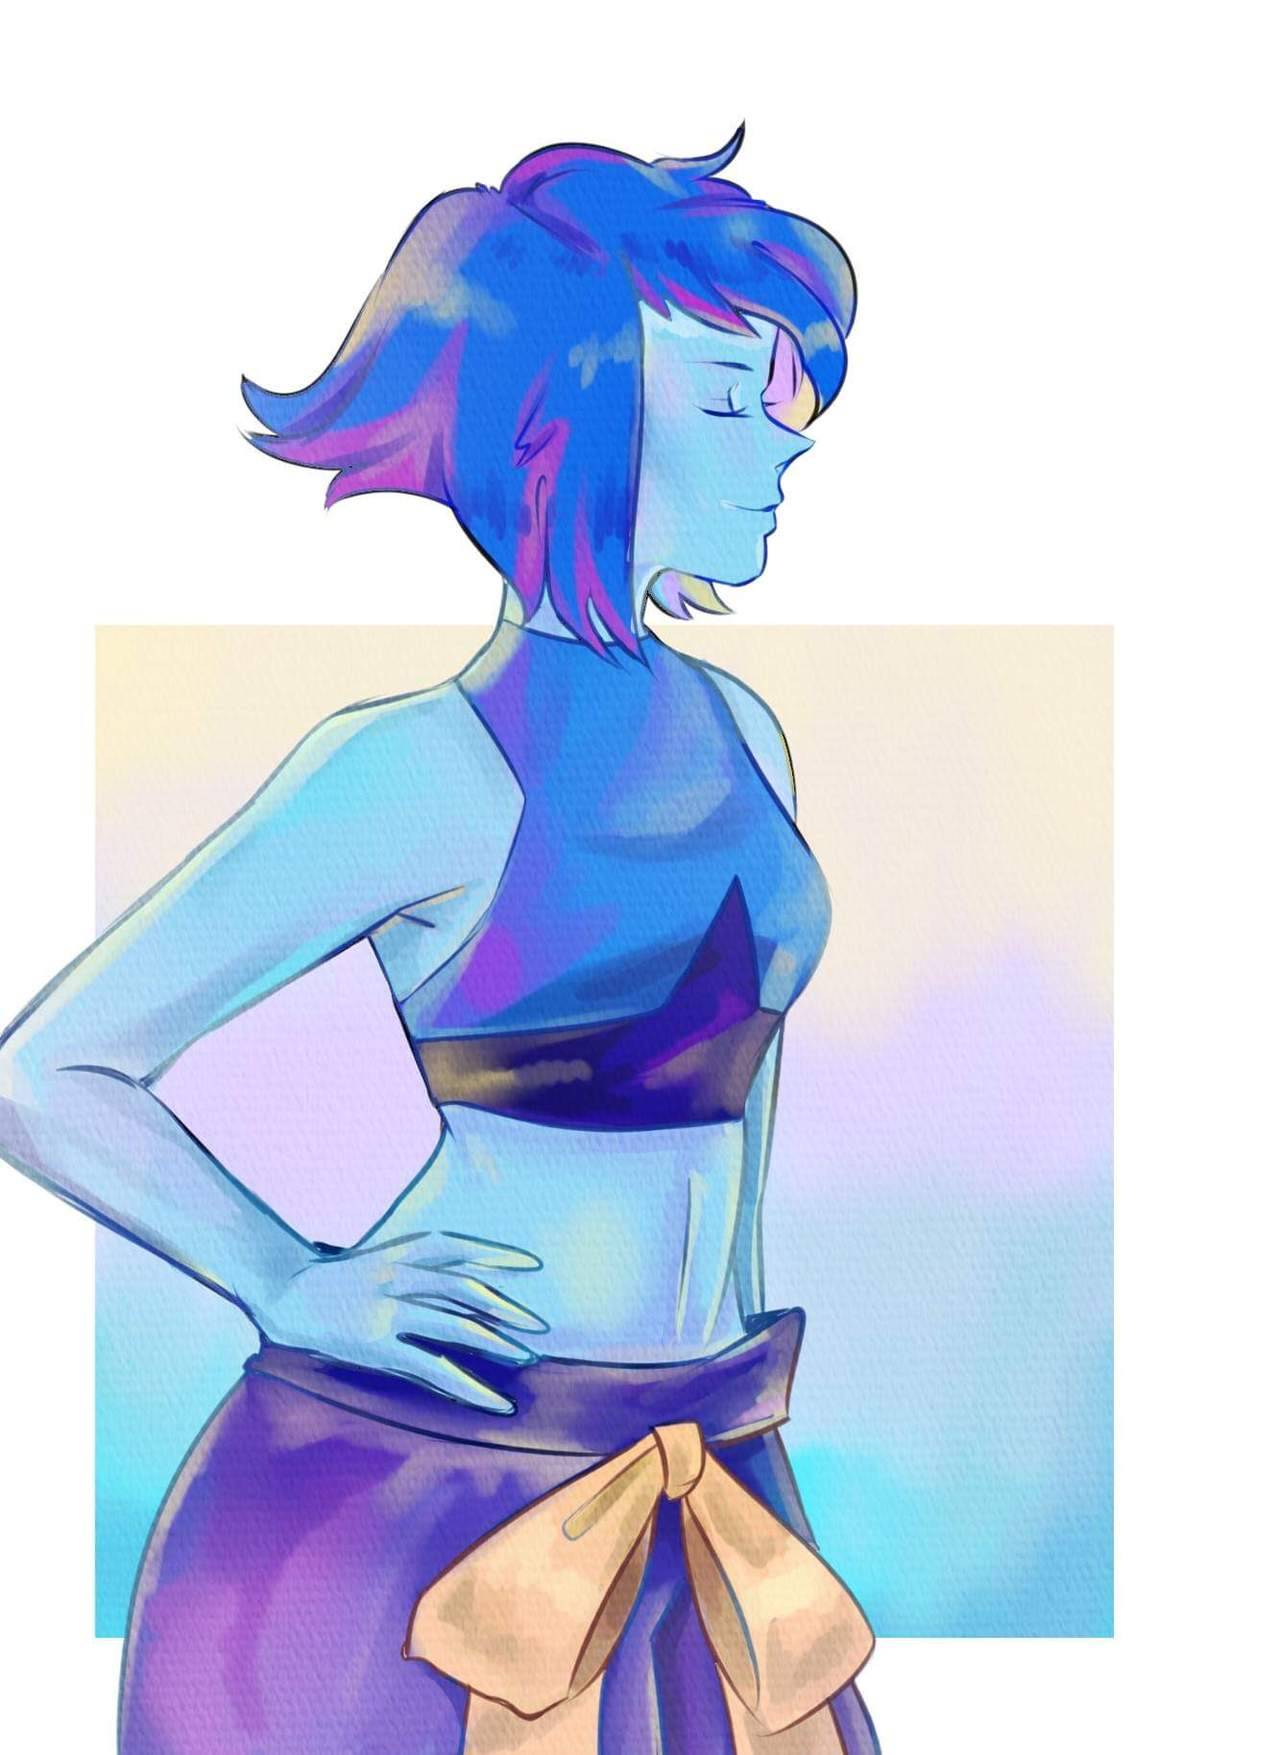 There was an attempt to draw new lapis in my pc with a completely different artstyle 
Anatomy seems a bit off but whatever 
Please tell me what you think bout it 💙